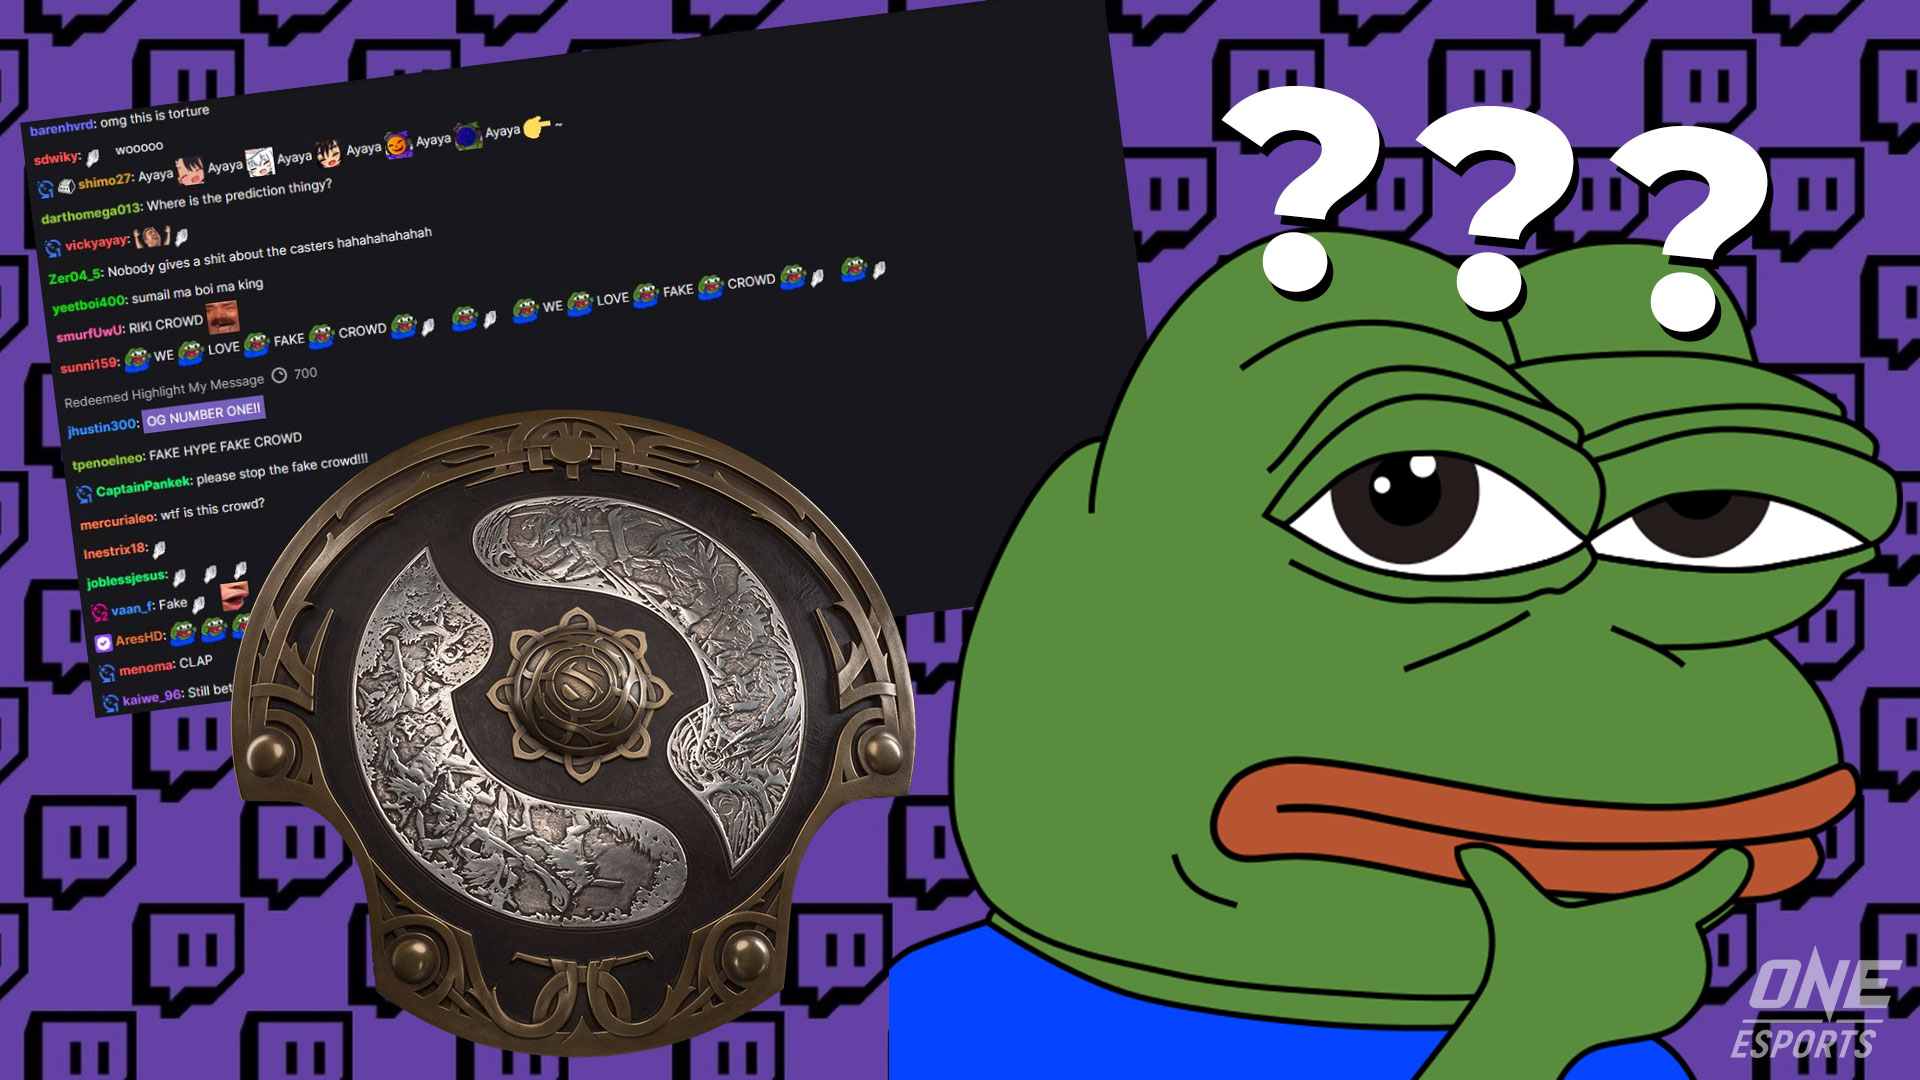 Twitch copypasta and memes: How to cheer for esports teams